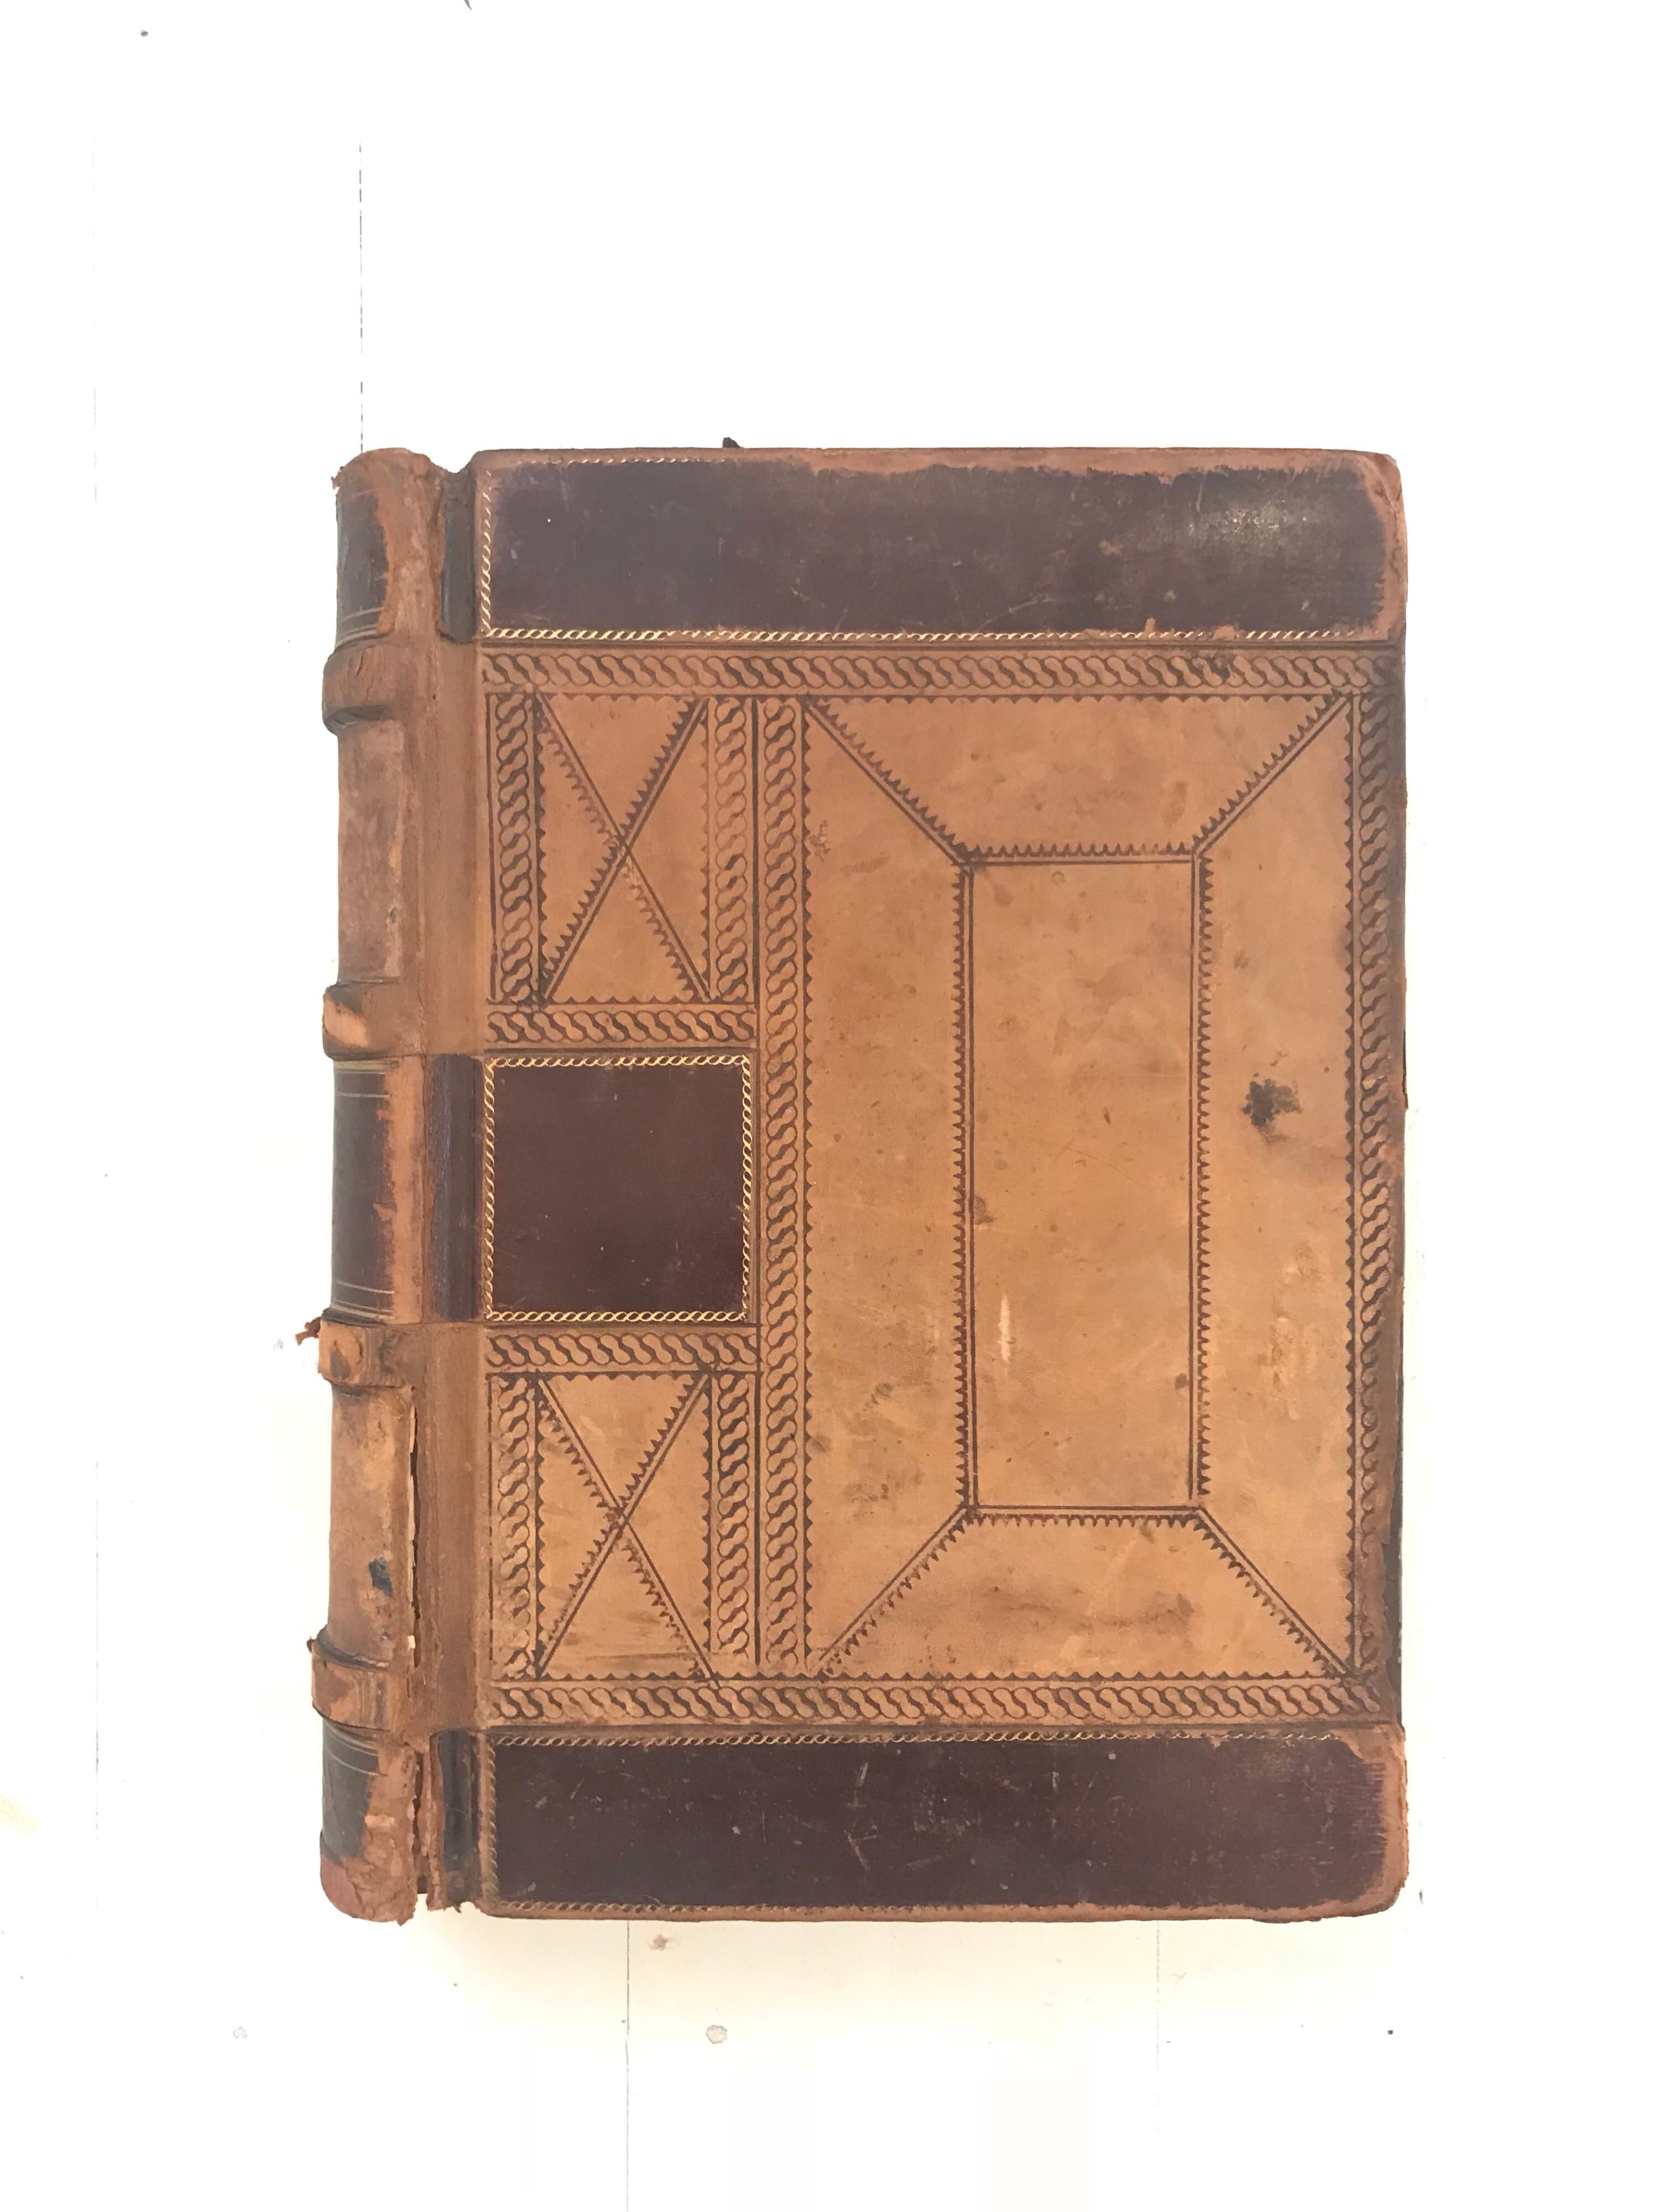 An old an attractive leather bound ledger book from the late 19th century. It's supple hand and natural patina make for an intriguing decorative objet. Try it as the base of an interiors book stack on your favorite coffee table. Instant vibe.